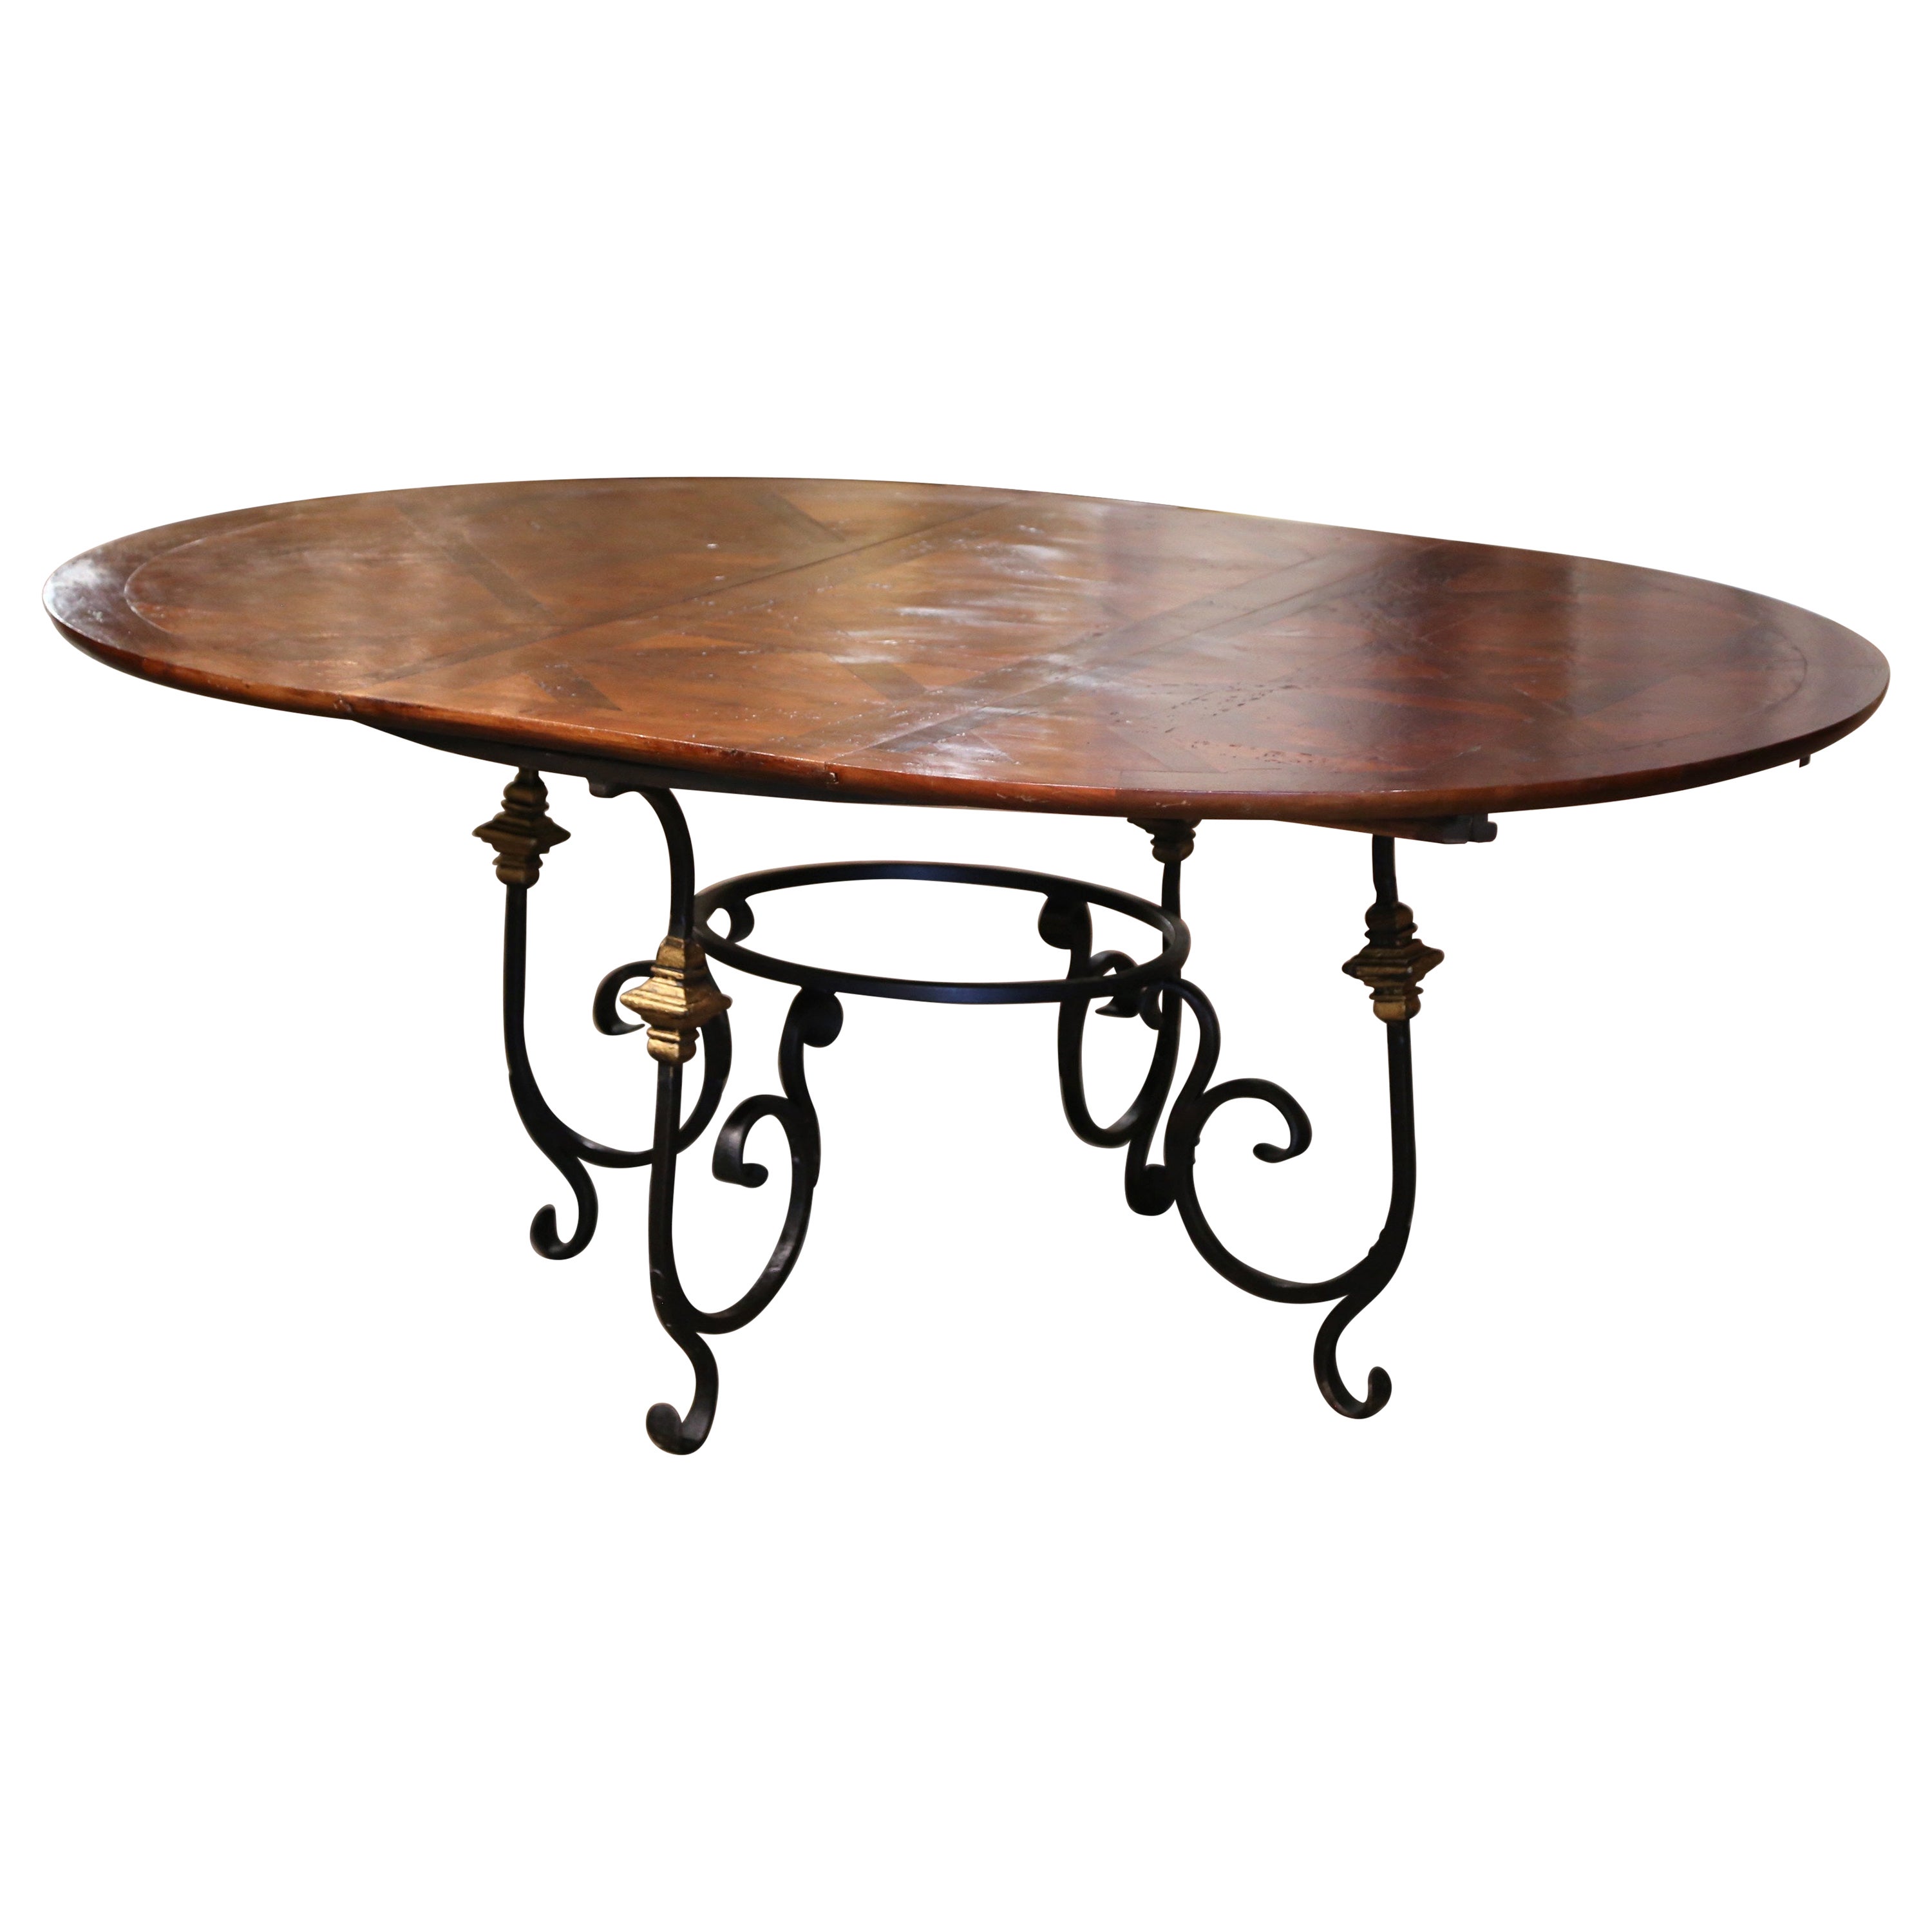 Mid-Century French Carved Walnut Dining Room Table on Wrought Iron Base w/ Leaf